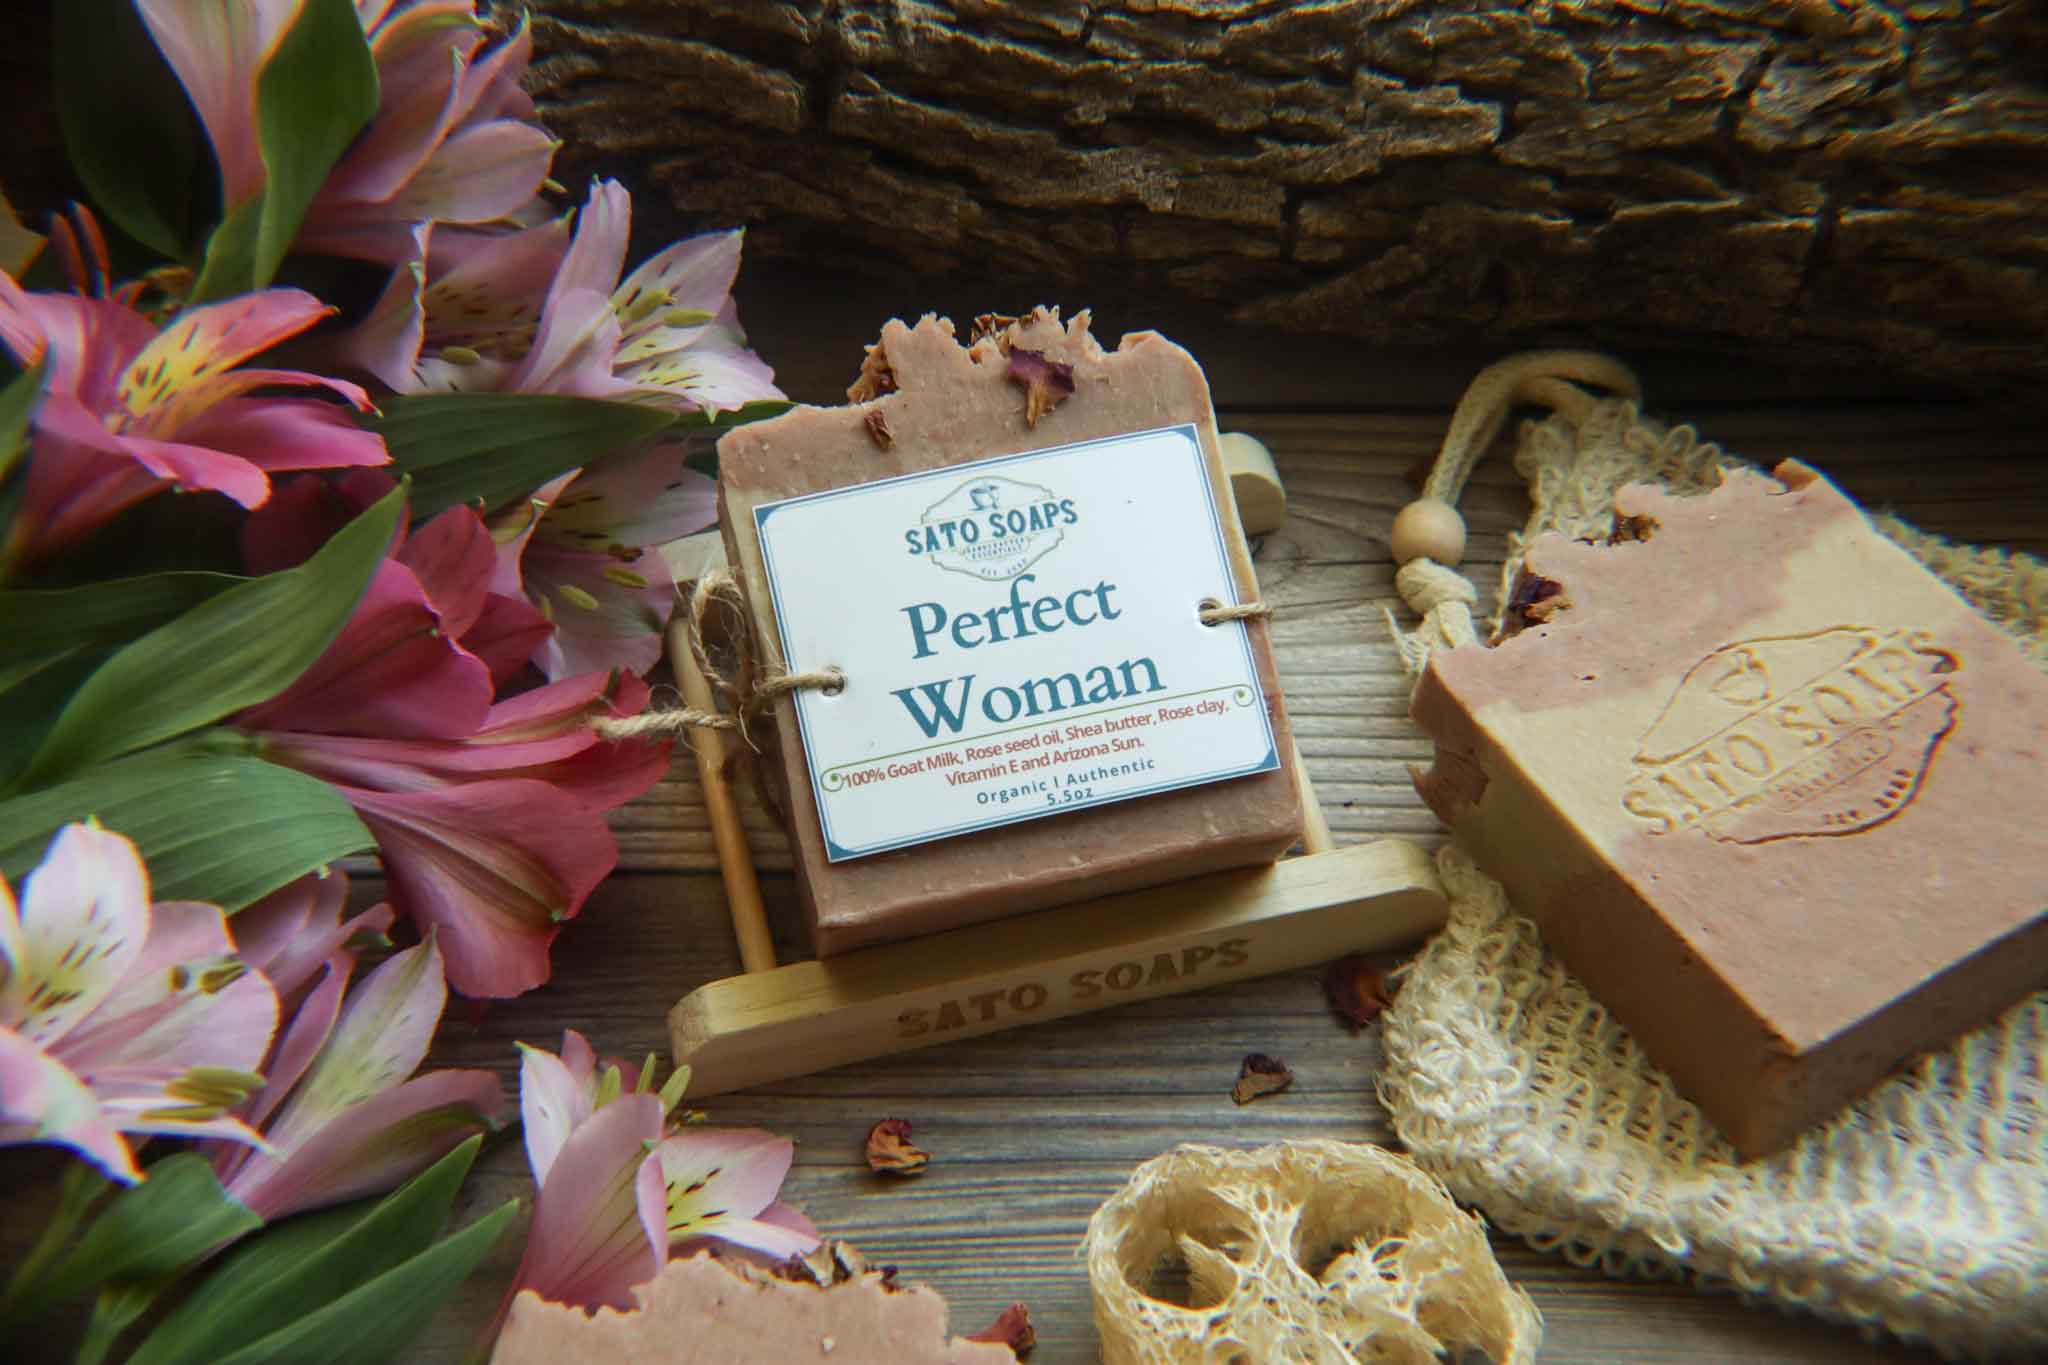 Perfect Woman (Goatmilk and Shea Butter with Rose Seed Body Soap Bar)